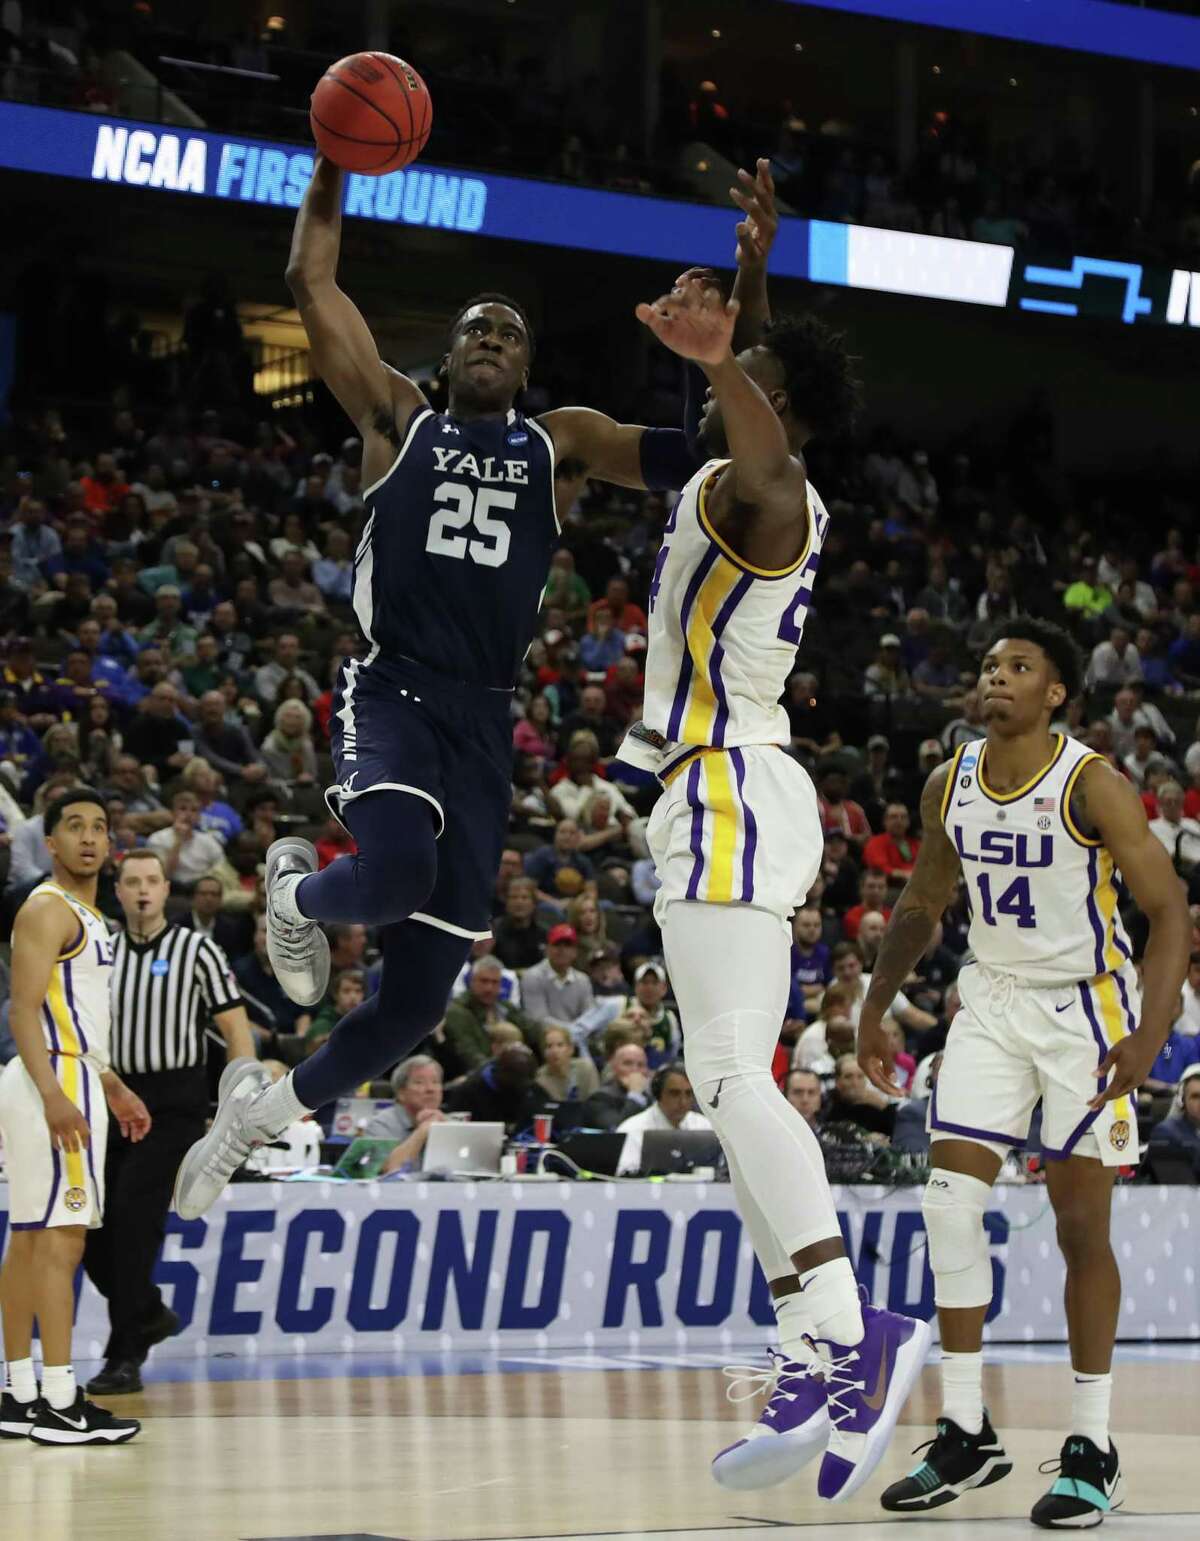 Yale’s Miye Oni (25) takes a shot against LSU’s Emmitt Williams (24) during the first round of the NCAA Men’s Basketball Tournament at VyStar Jacksonville Veterans Memorial Arena on March 21in Jacksonville, Fla.